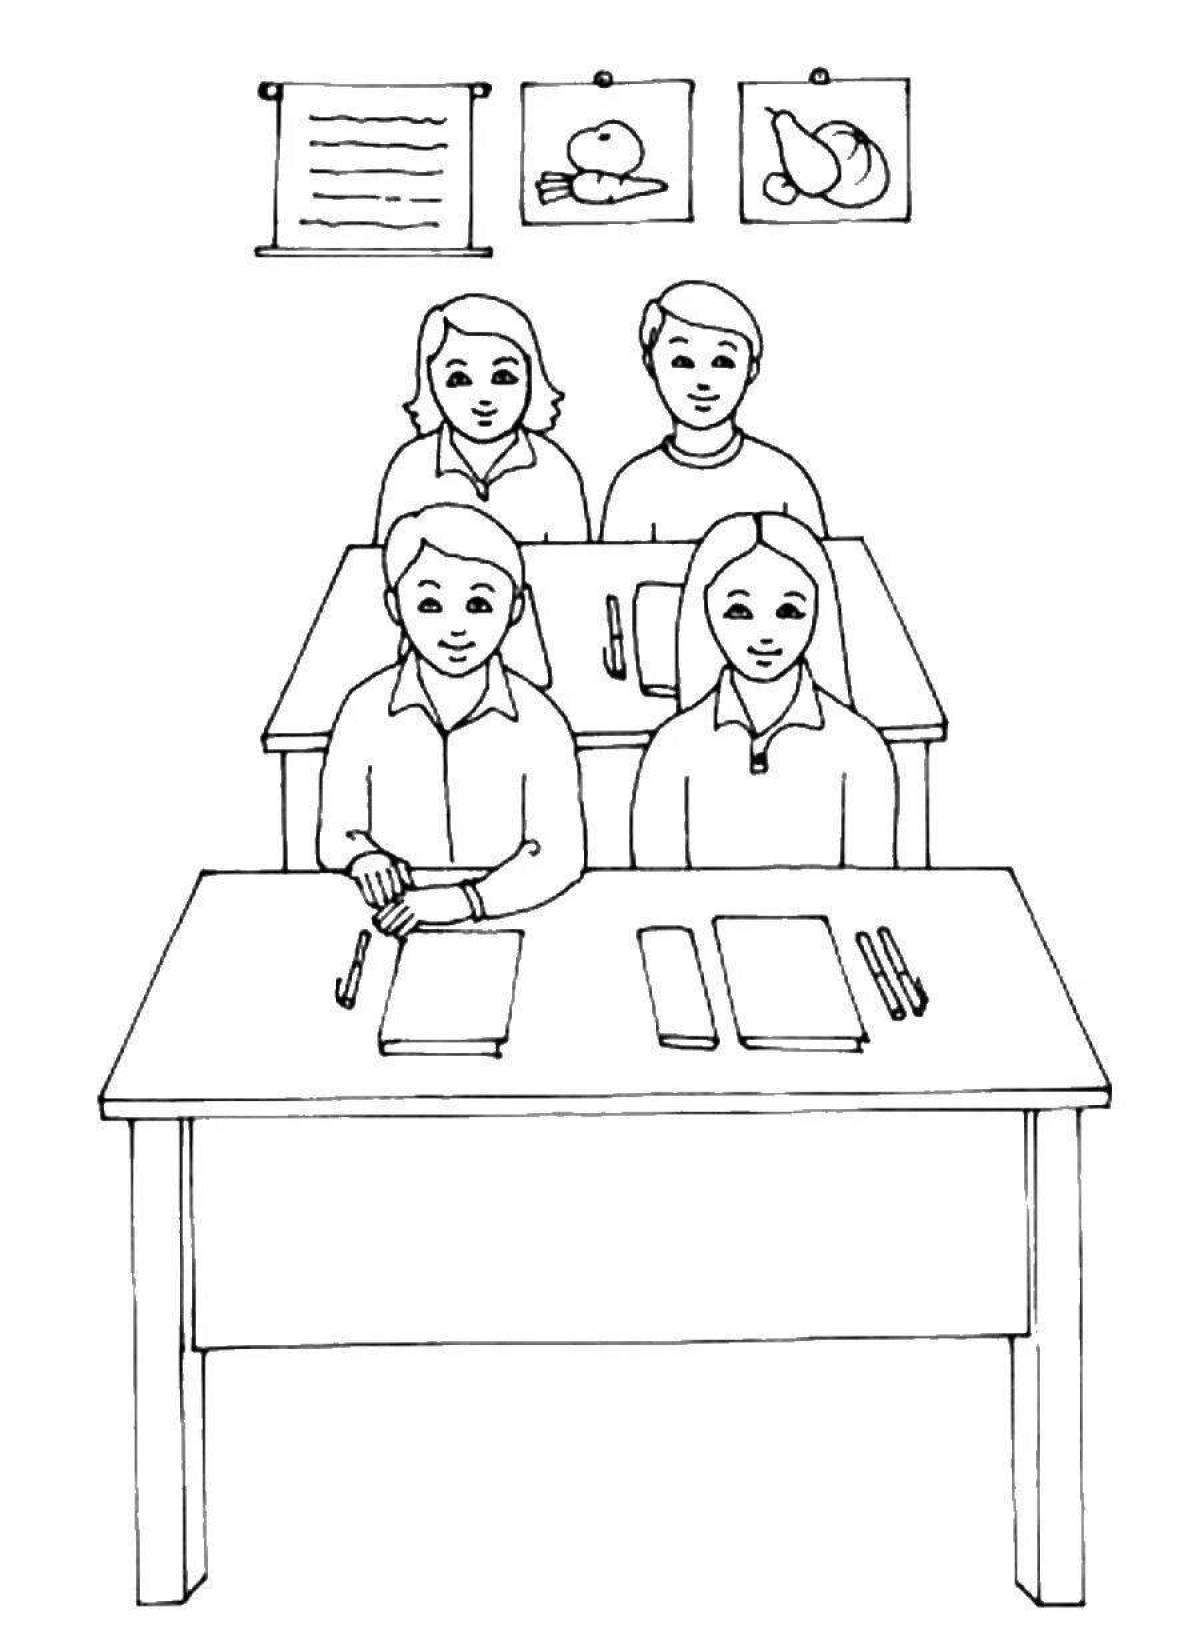 Playful school life coloring page